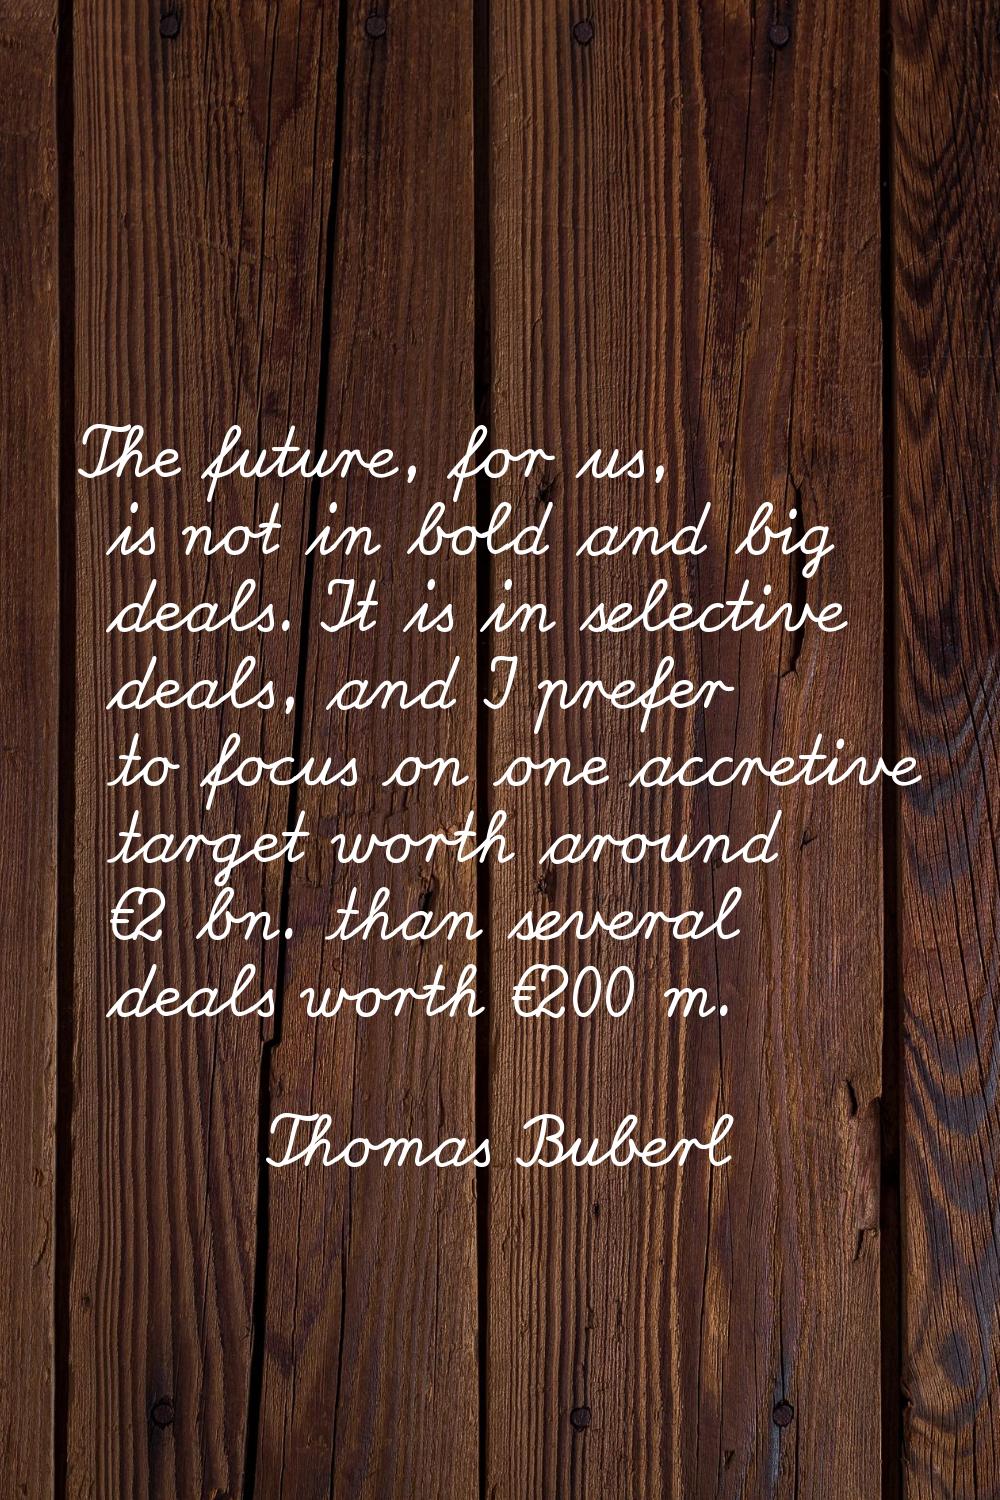 The future, for us, is not in bold and big deals. It is in selective deals, and I prefer to focus o